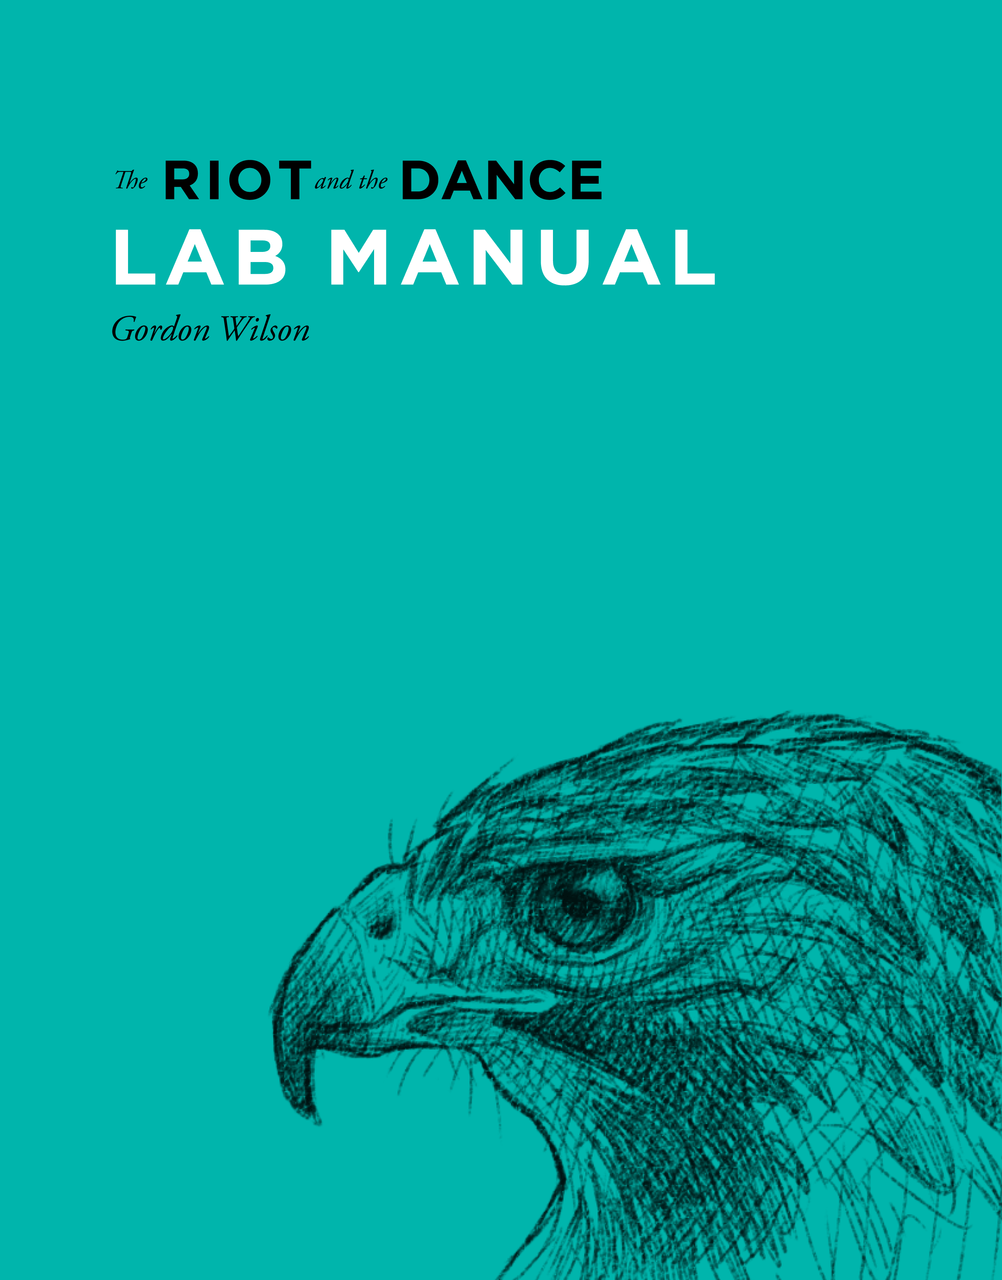 Lab Manual for The Riot and the Dance